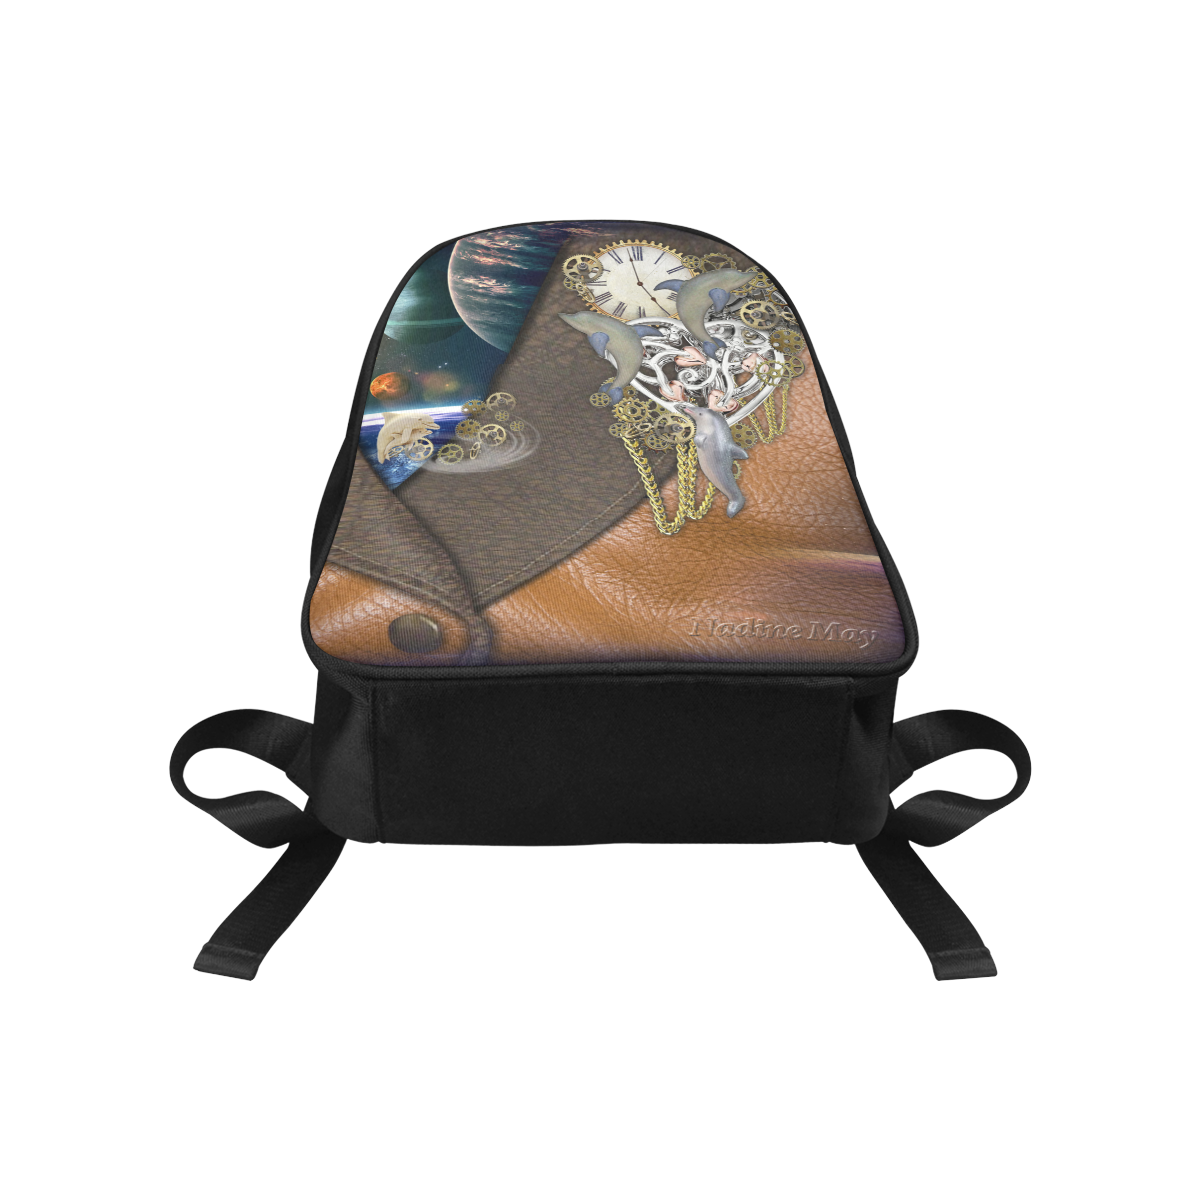 Our dimension of Time Fabric School Backpack (Model 1682) (Medium)